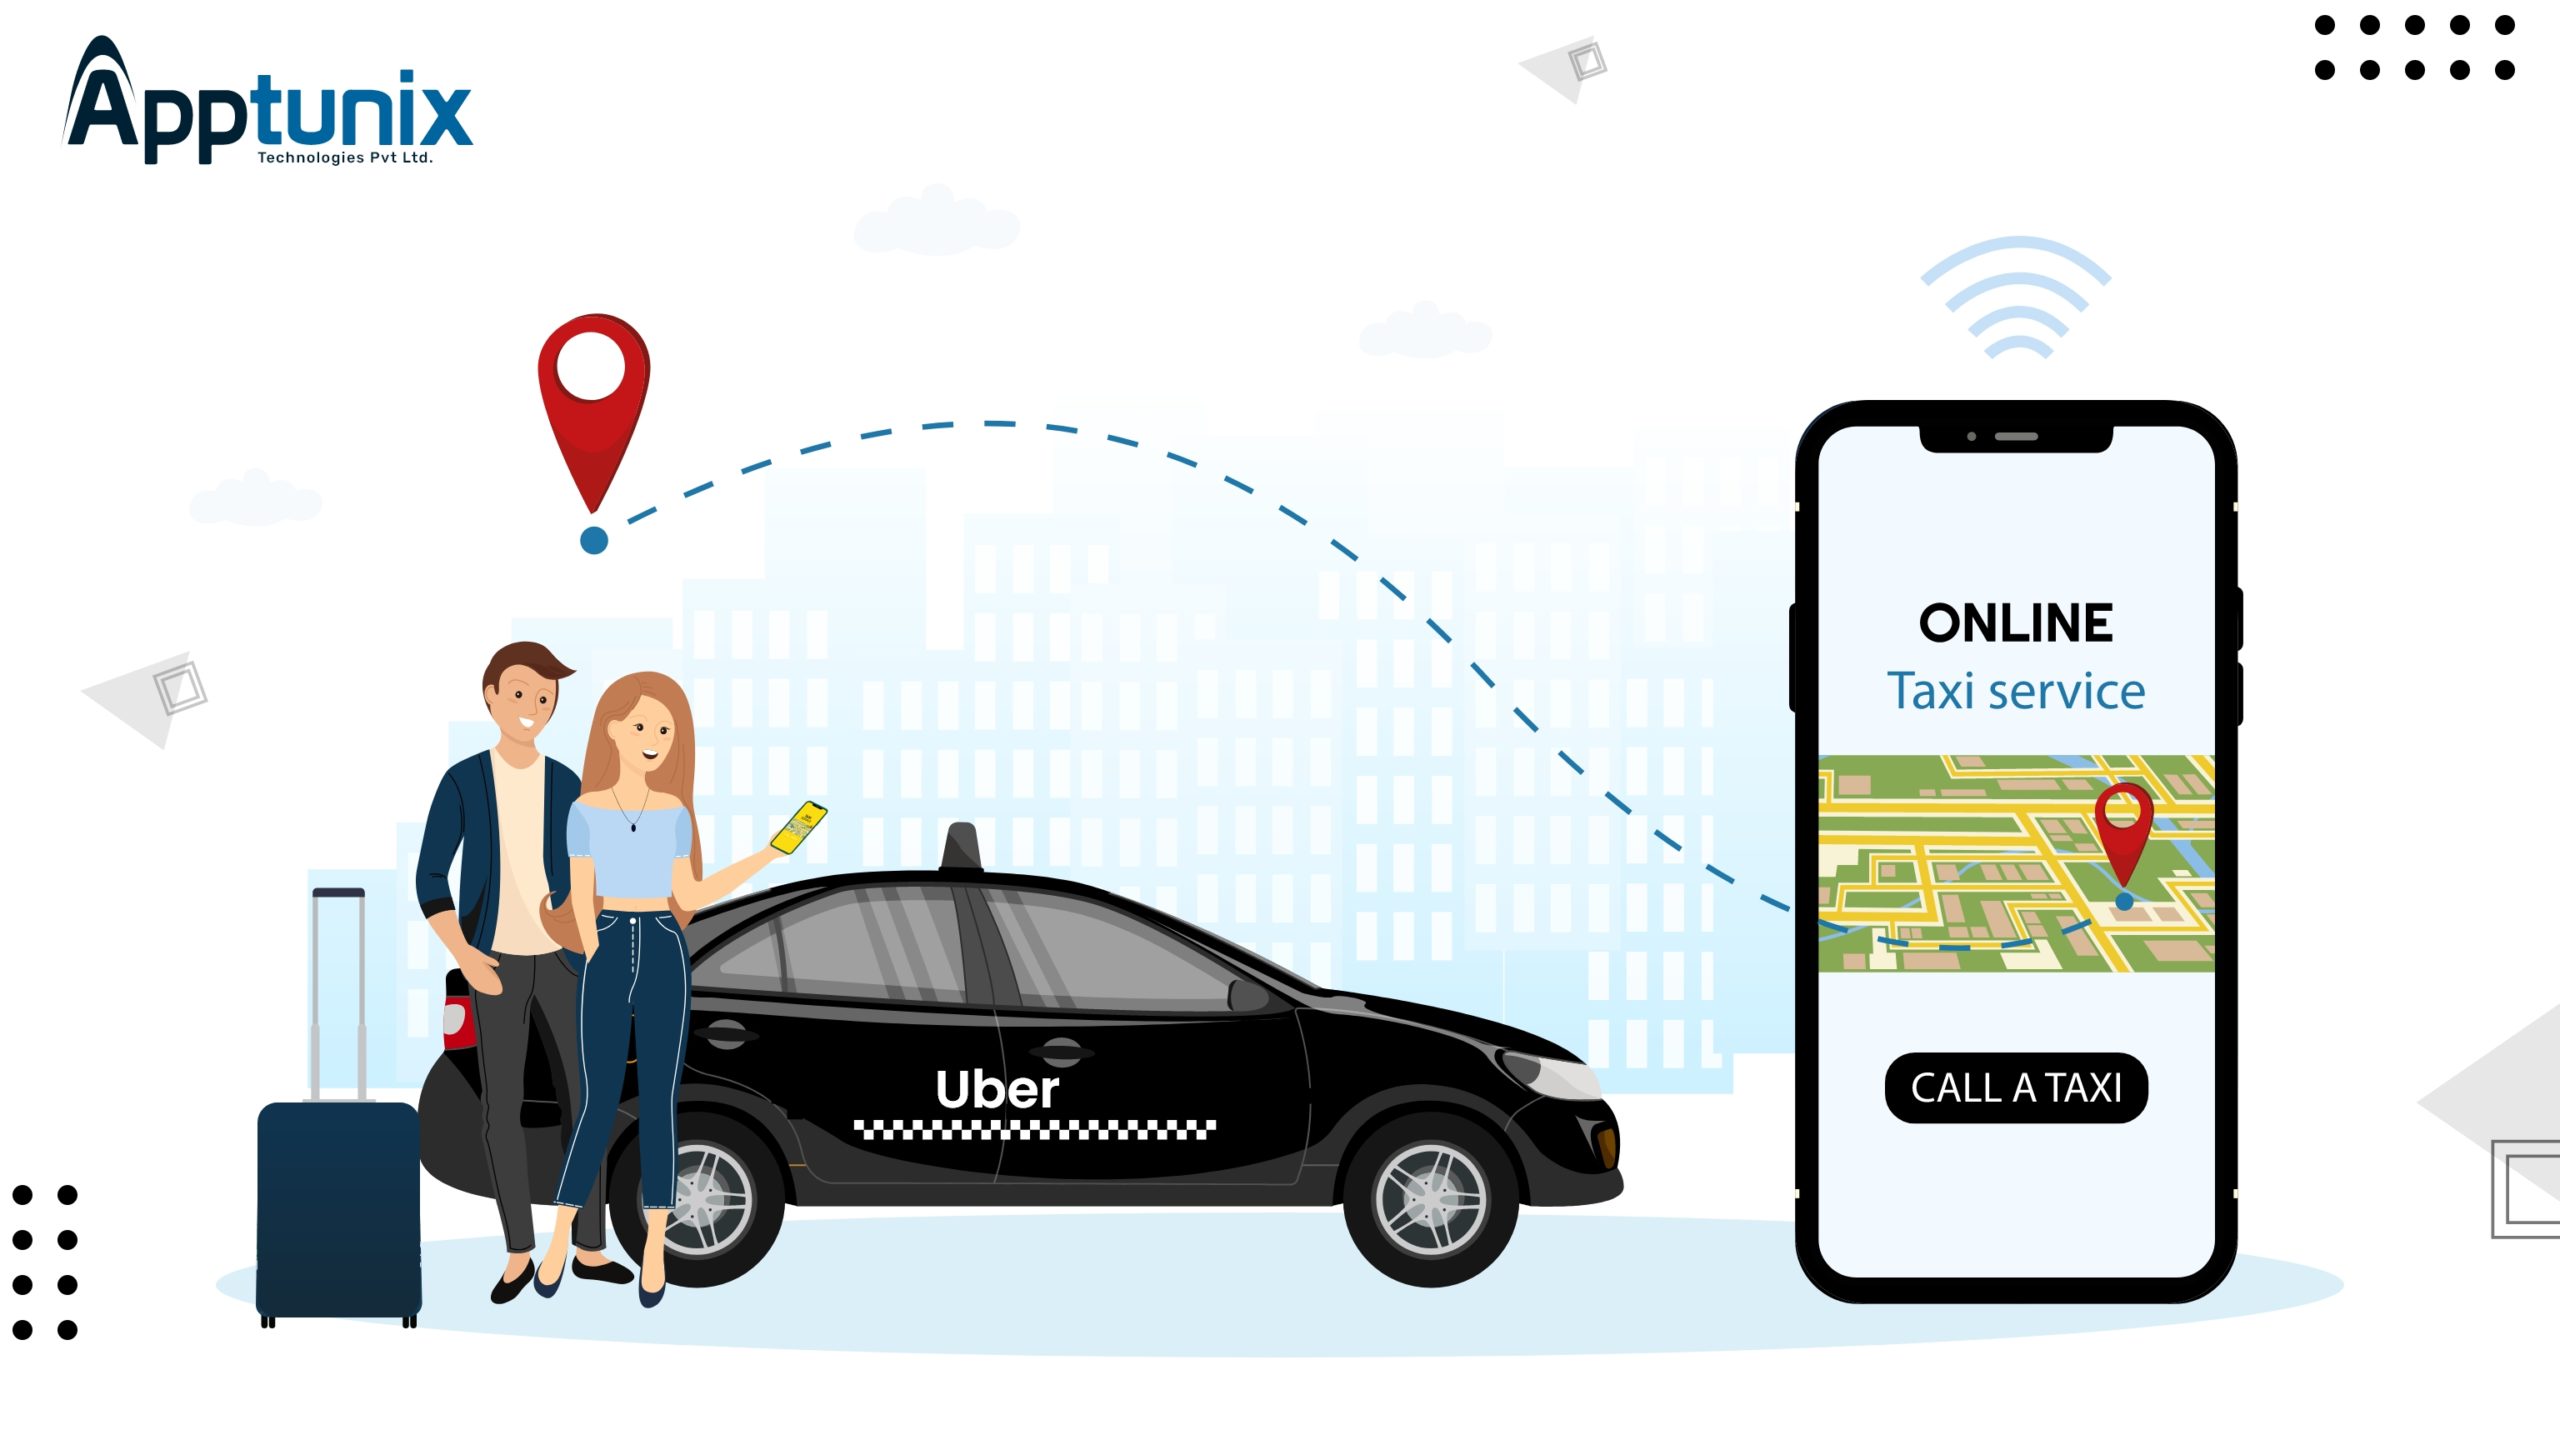 Taxi Near Me - Request Taxi Service with Uber